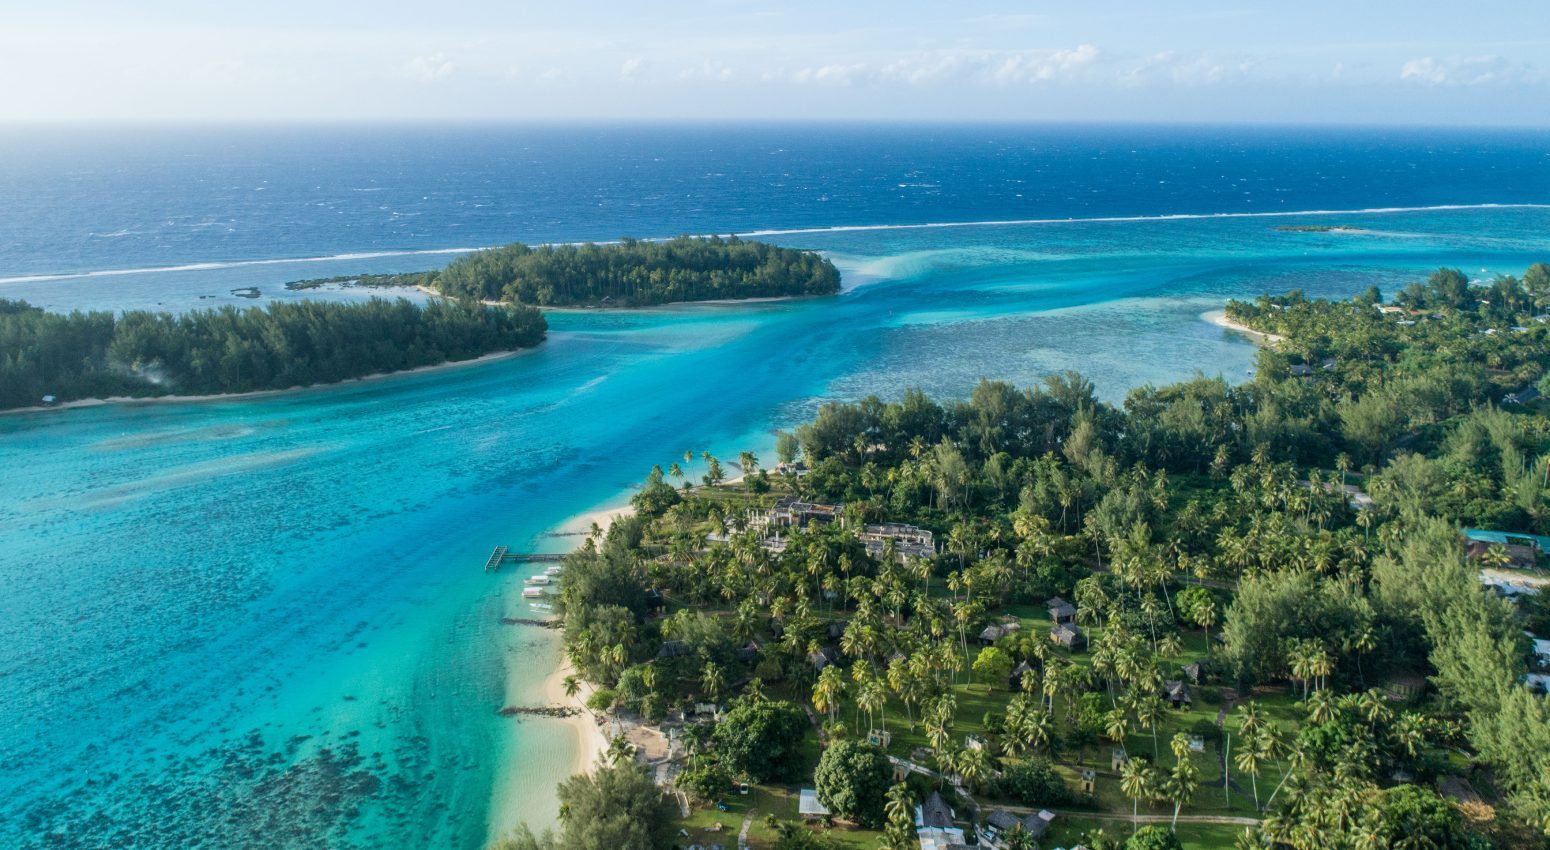 A panoramic view of the tropical island of Moorea in French Polynesia